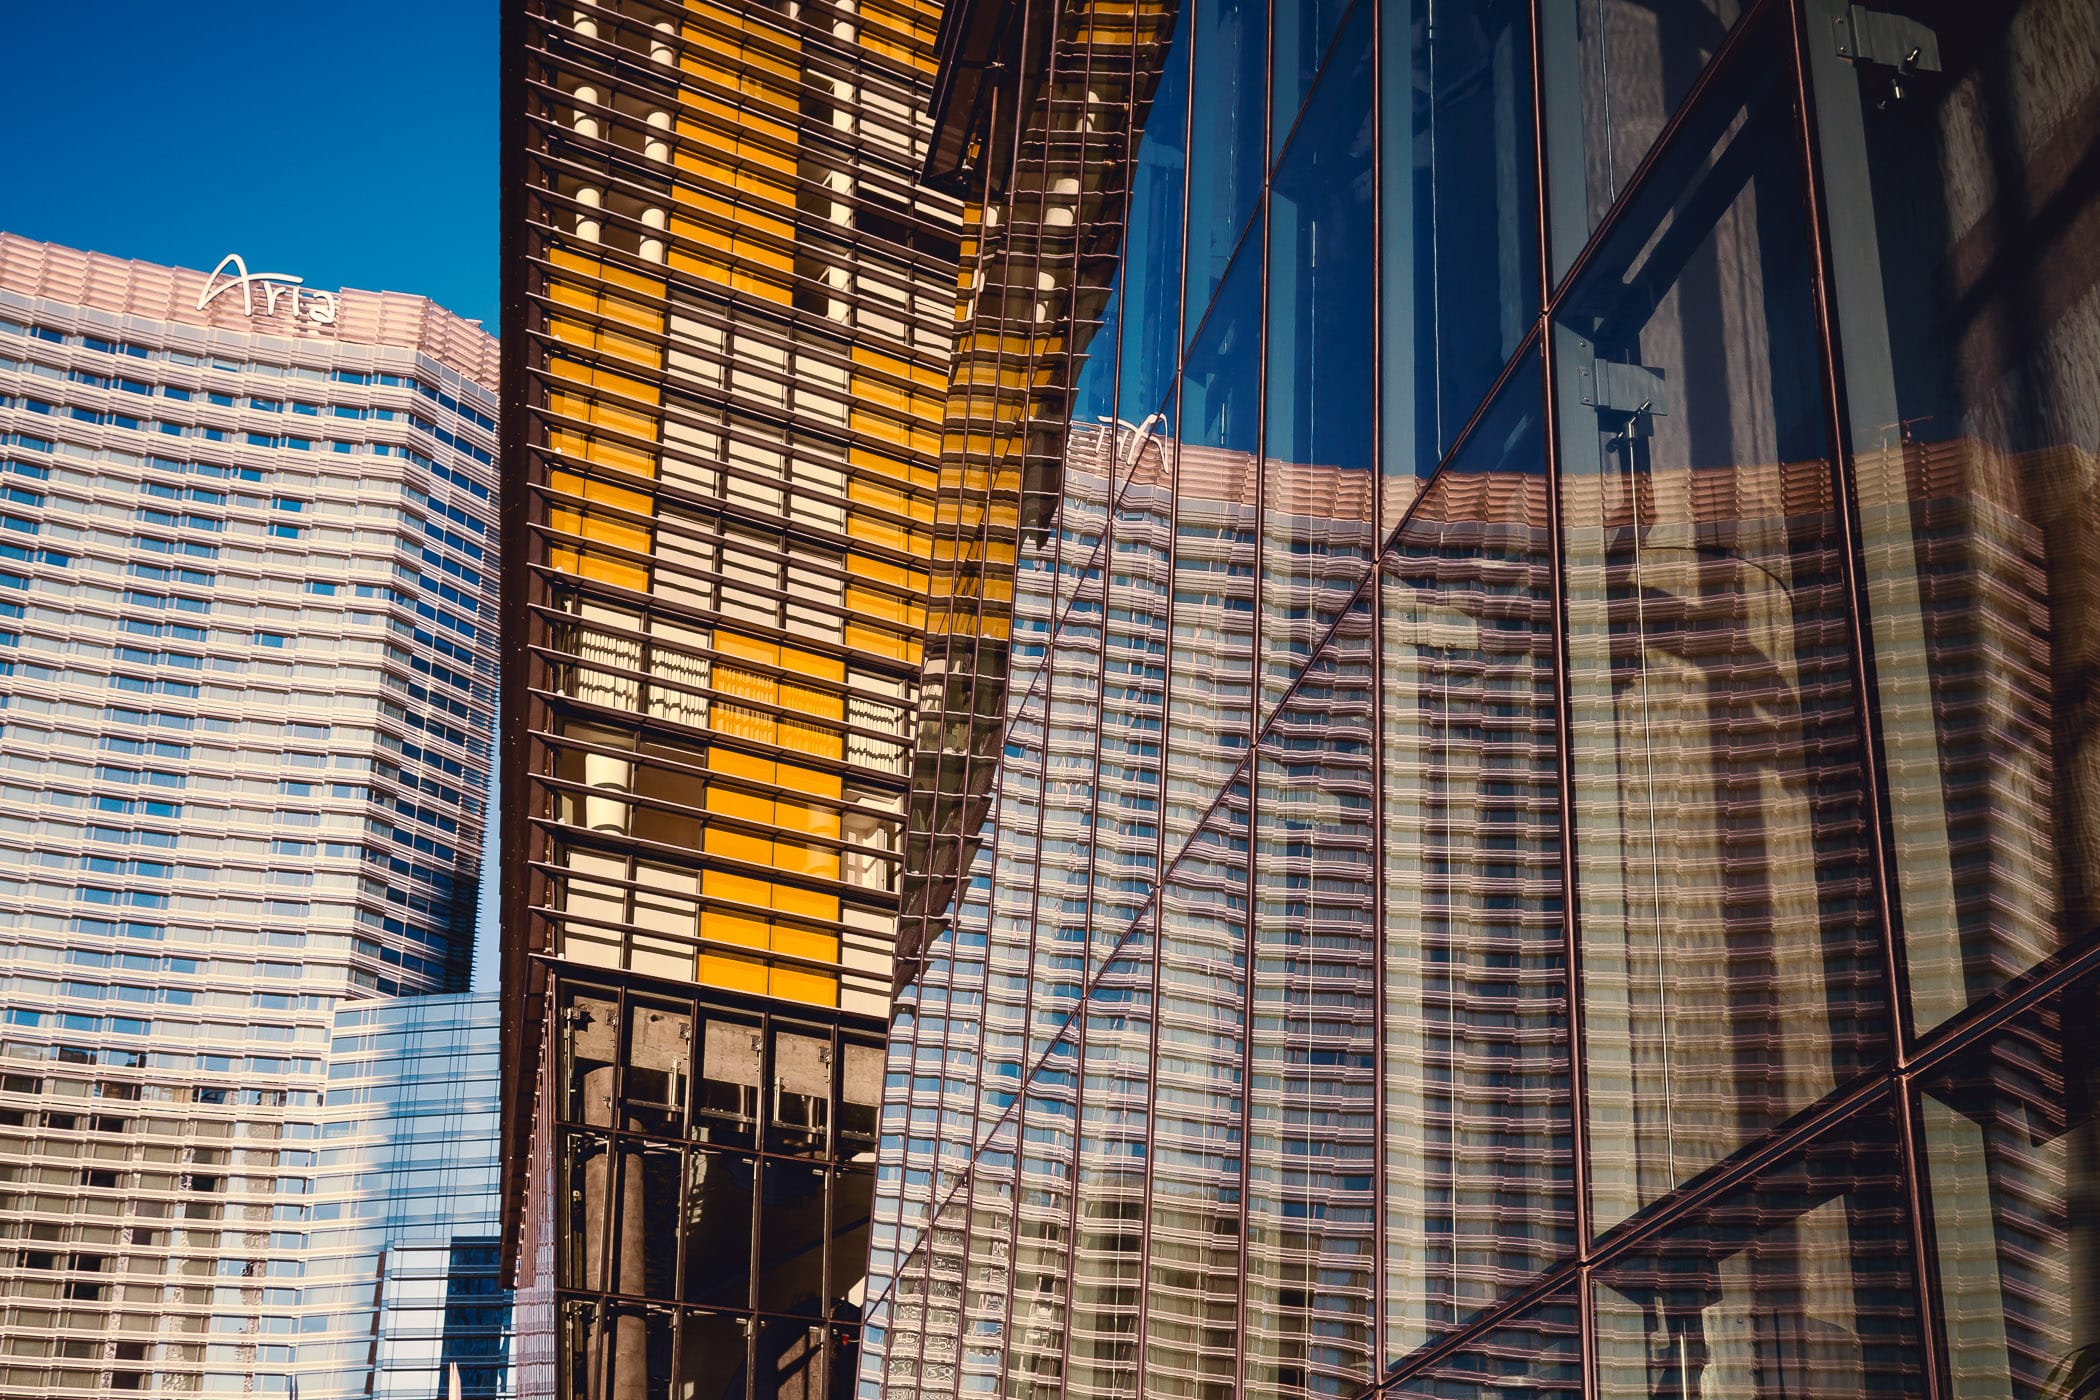 The Aria reflected in the lower level windows of the west Veer Tower, CityCenter, Las Vegas.